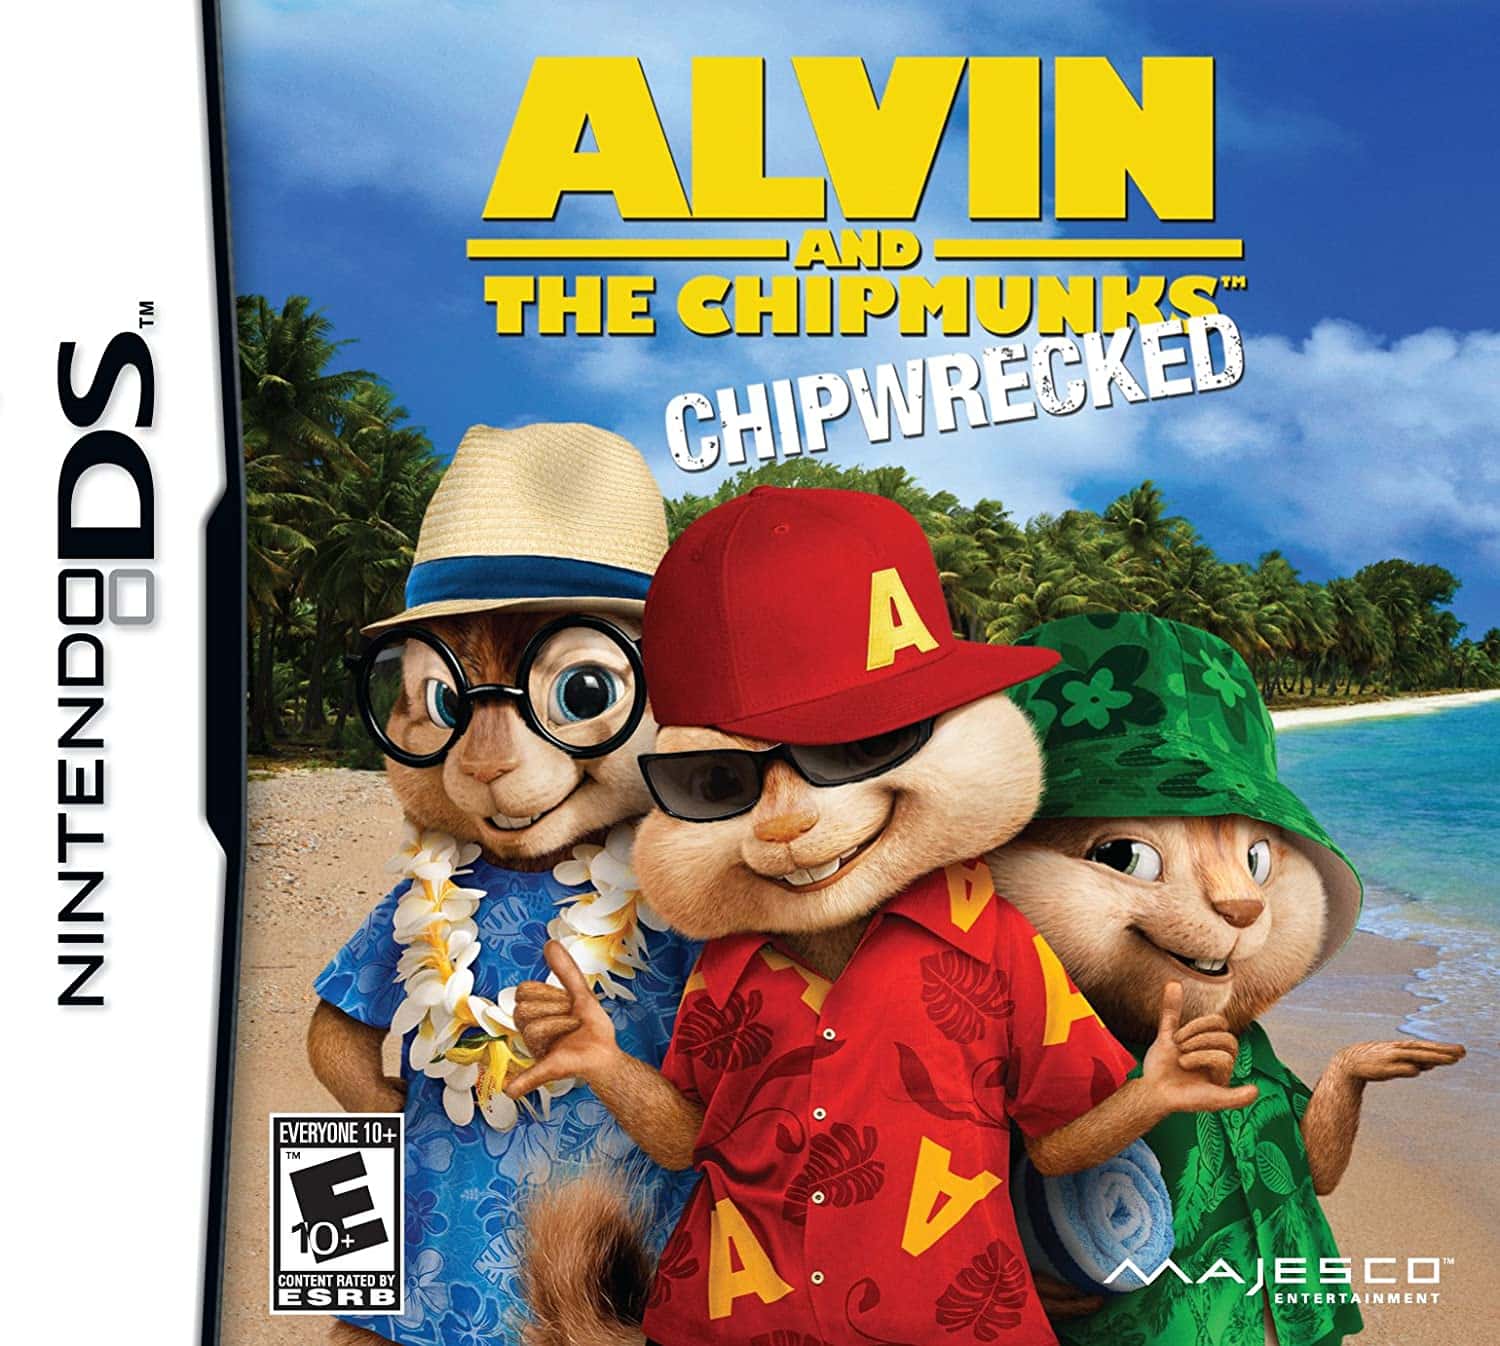 Alvin and the Chipmunks: Chipwrecked player count stats